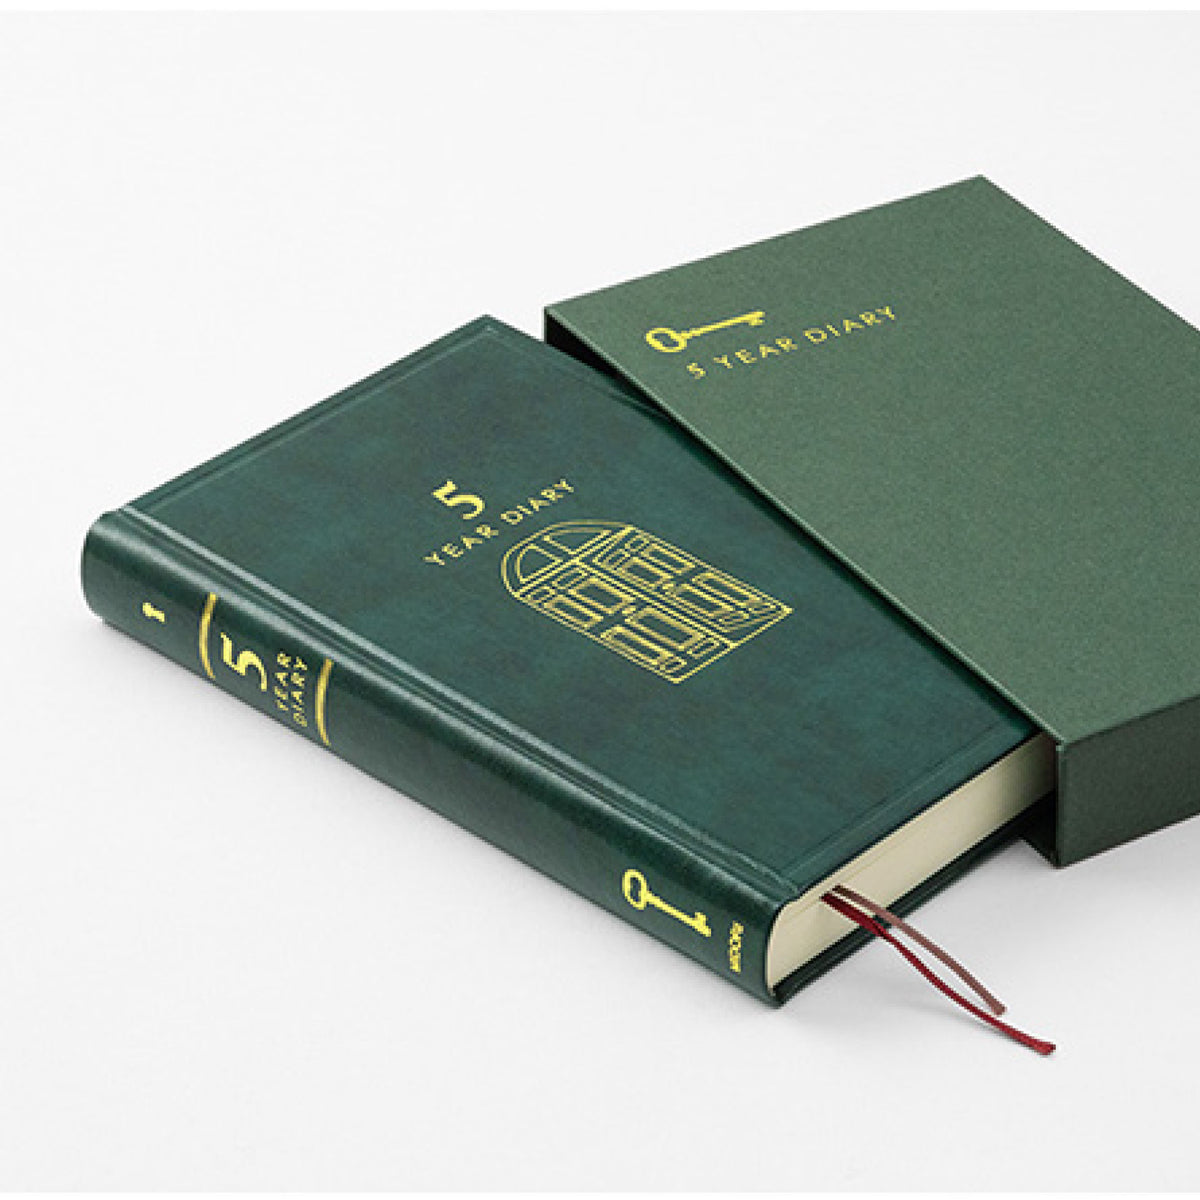 Midori - Daily Journal - 5 Years - Recycled Leather Green (Limited Edition)